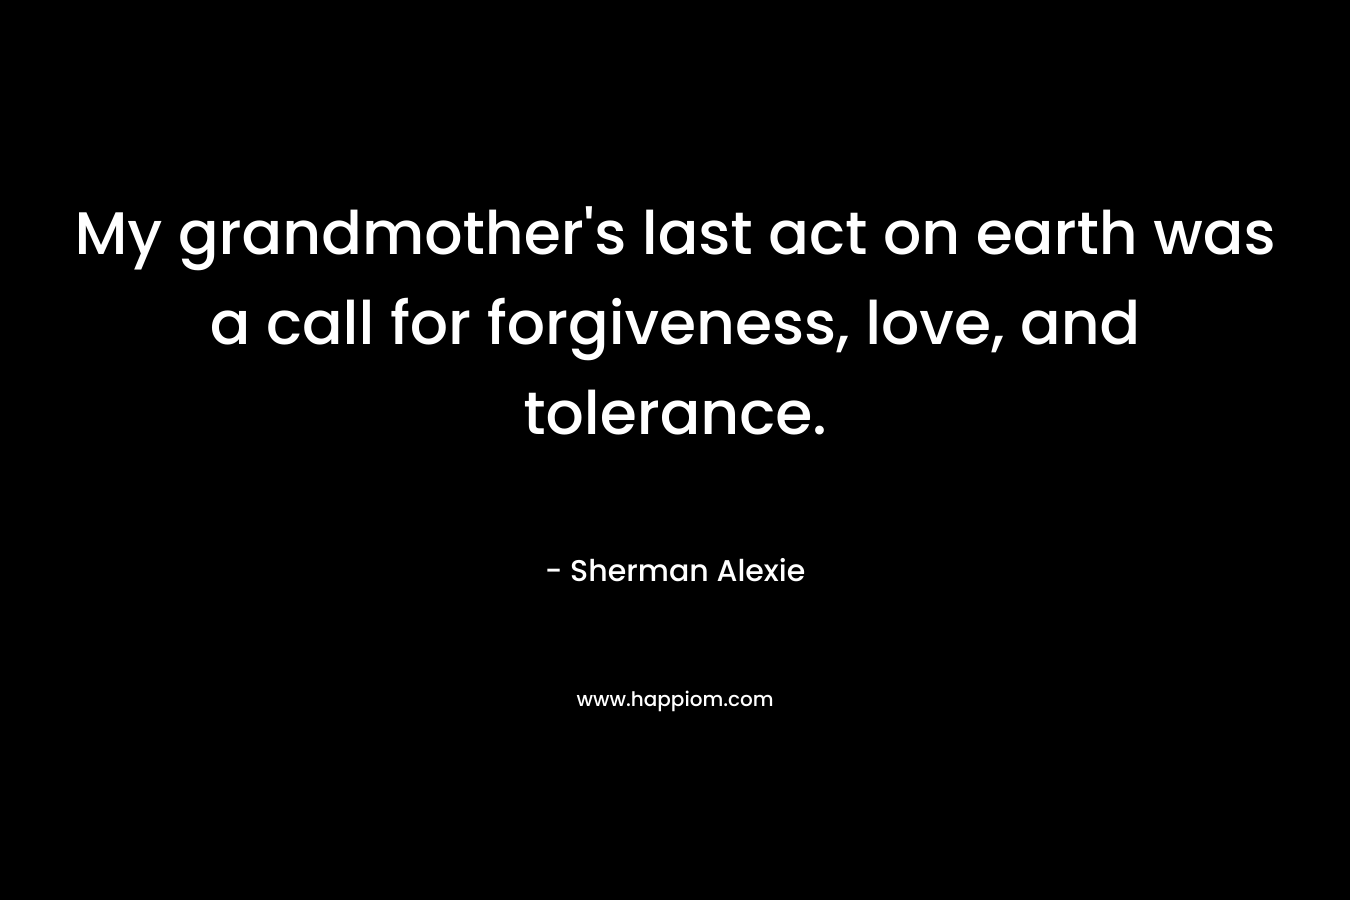 My grandmother’s last act on earth was a call for forgiveness, love, and tolerance. – Sherman Alexie